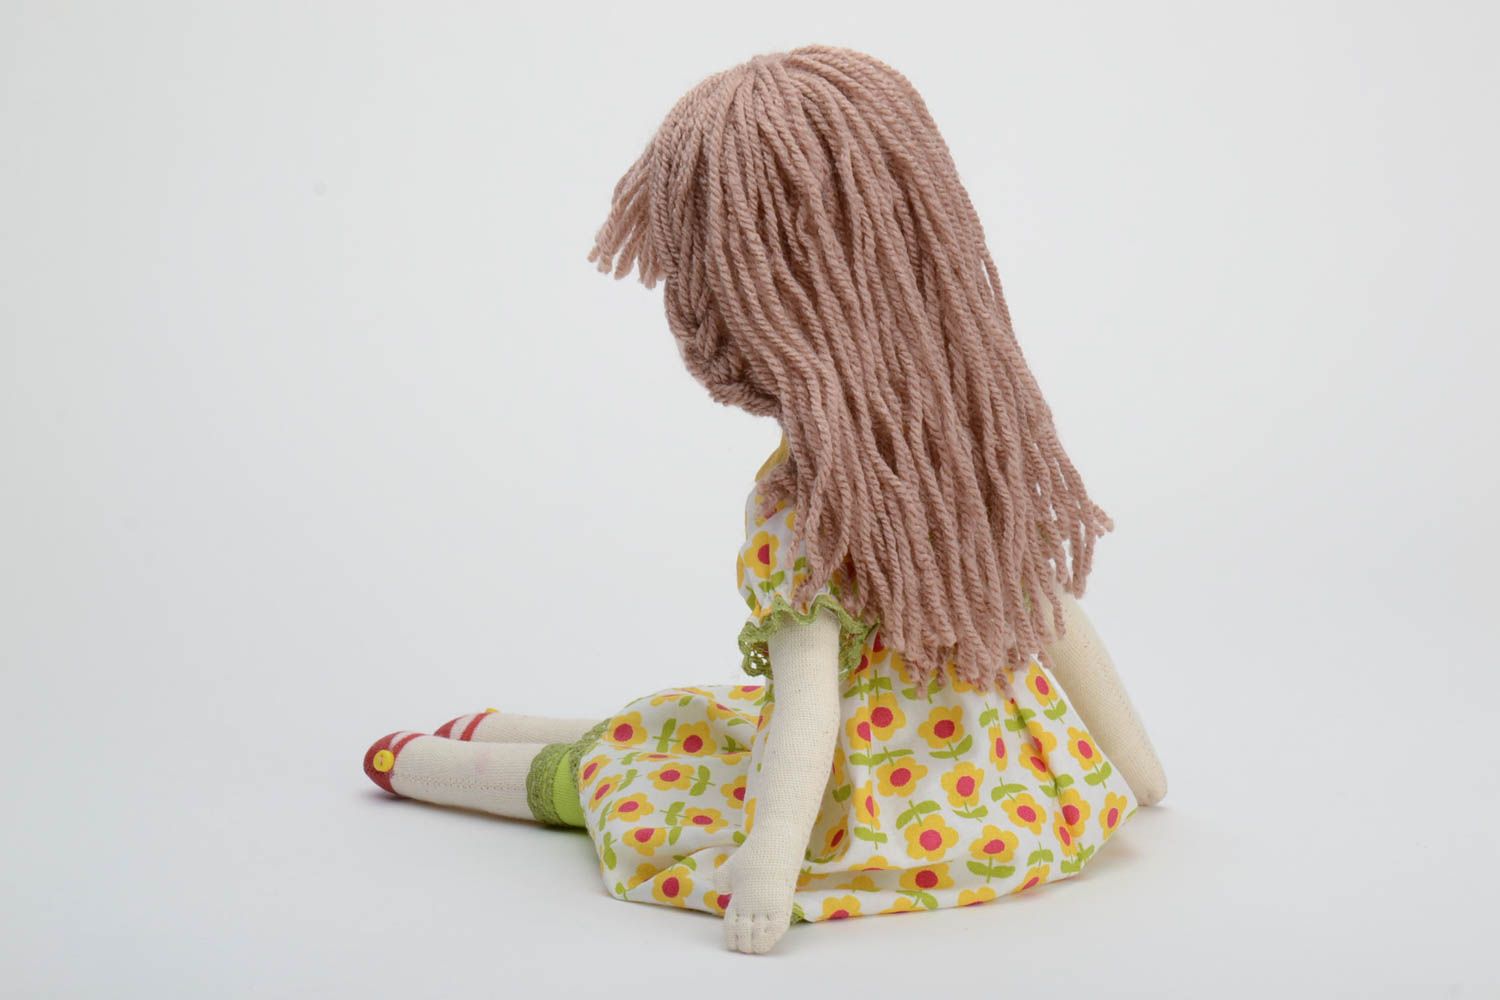 Handmade designer soft doll sewn of cotton fabric girl in floral dress photo 4